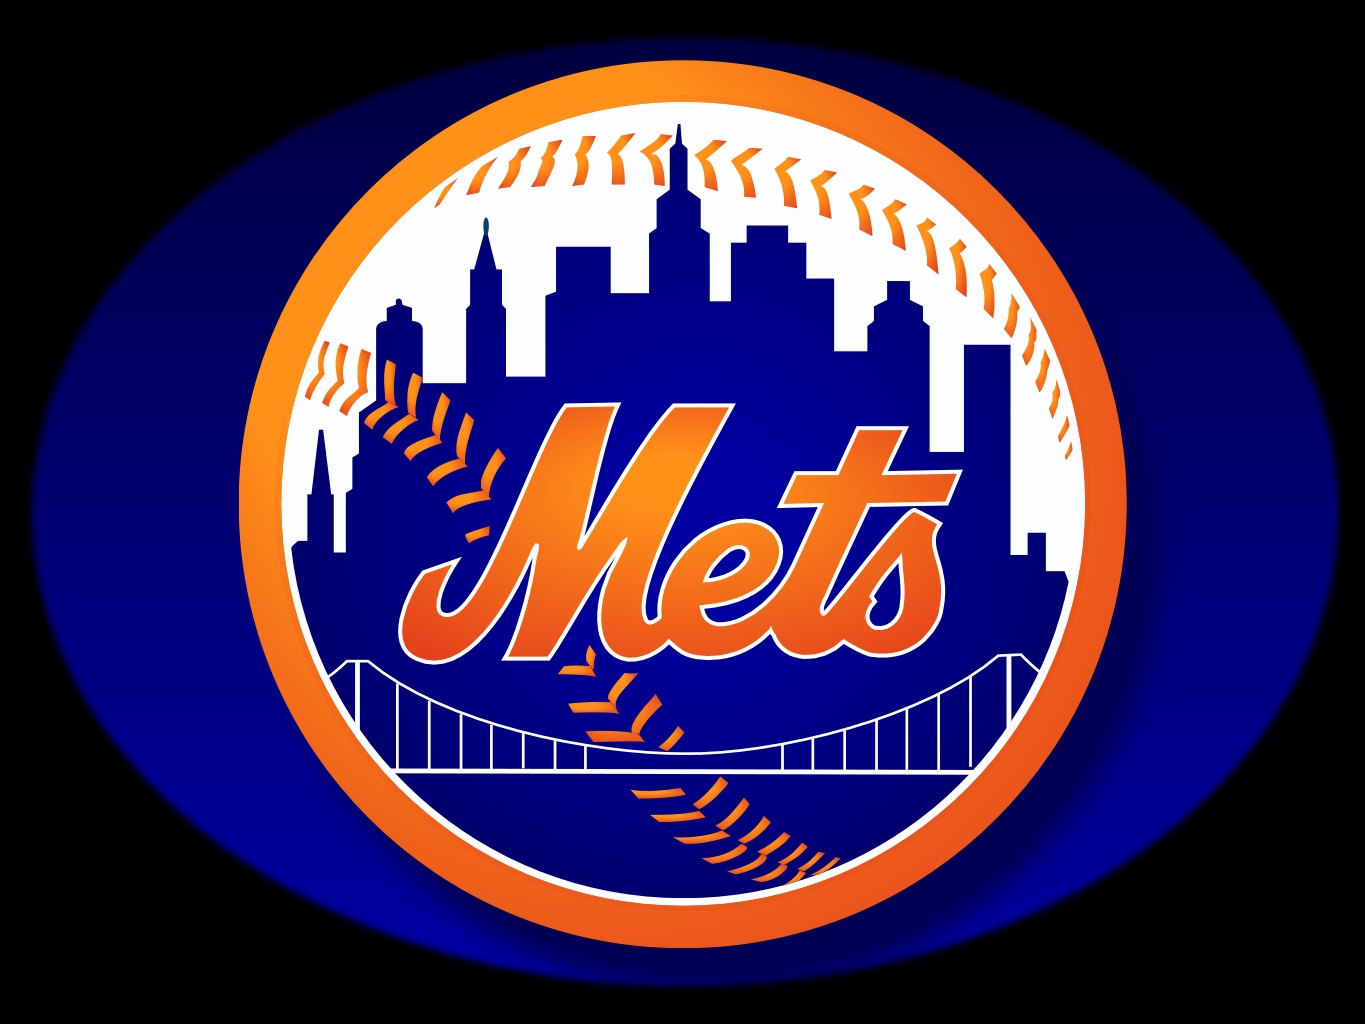 Baseball and Football on TV My favorite teams are the New York Mets